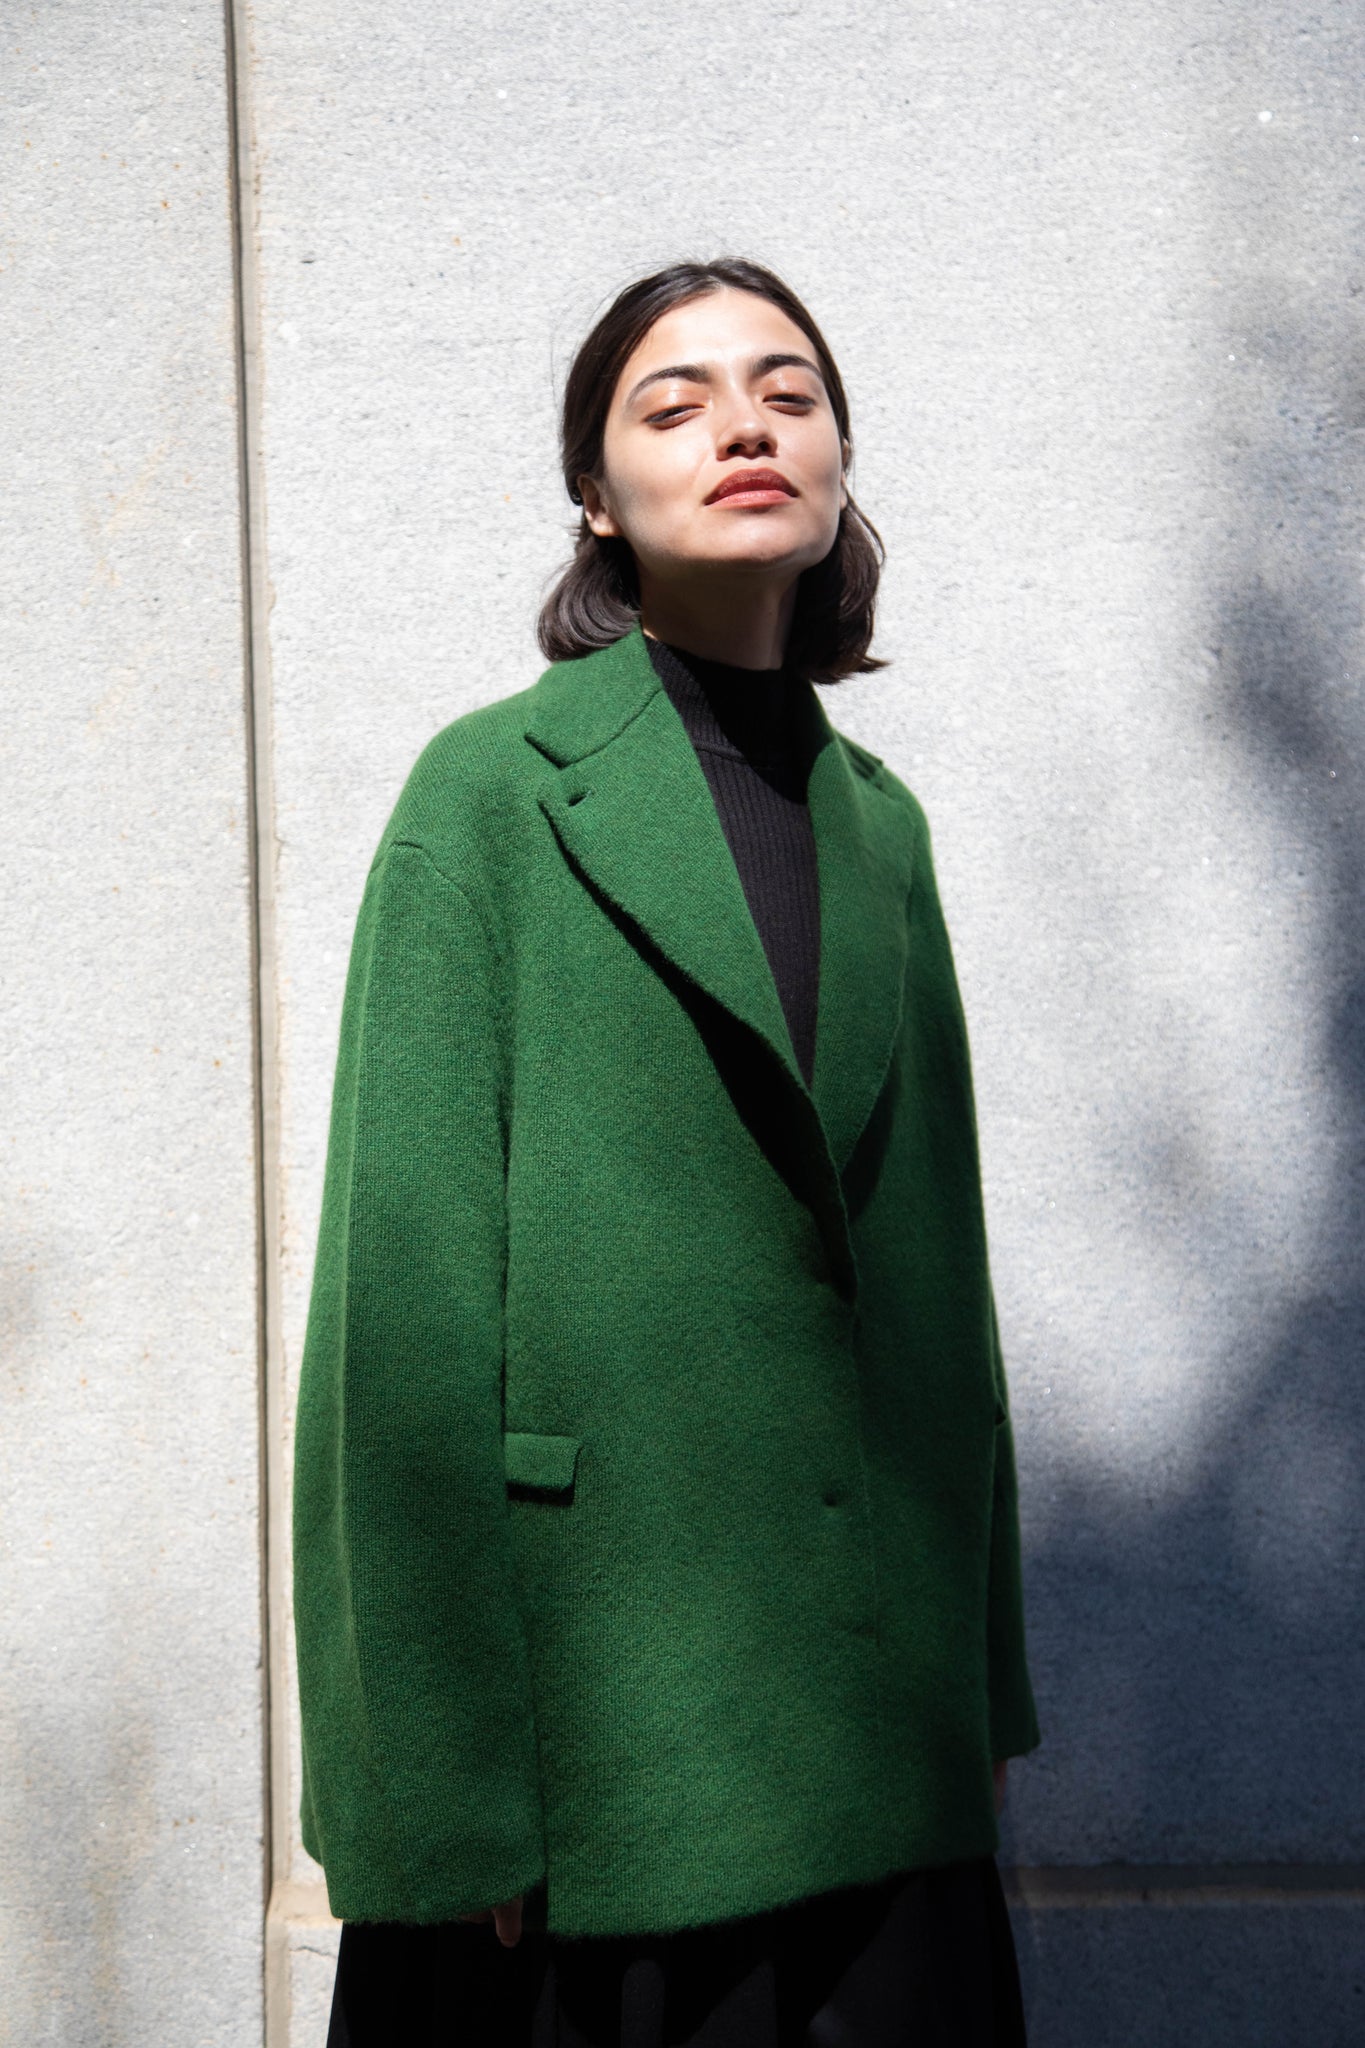 Boboutic | Double Passion Short Coat in Green